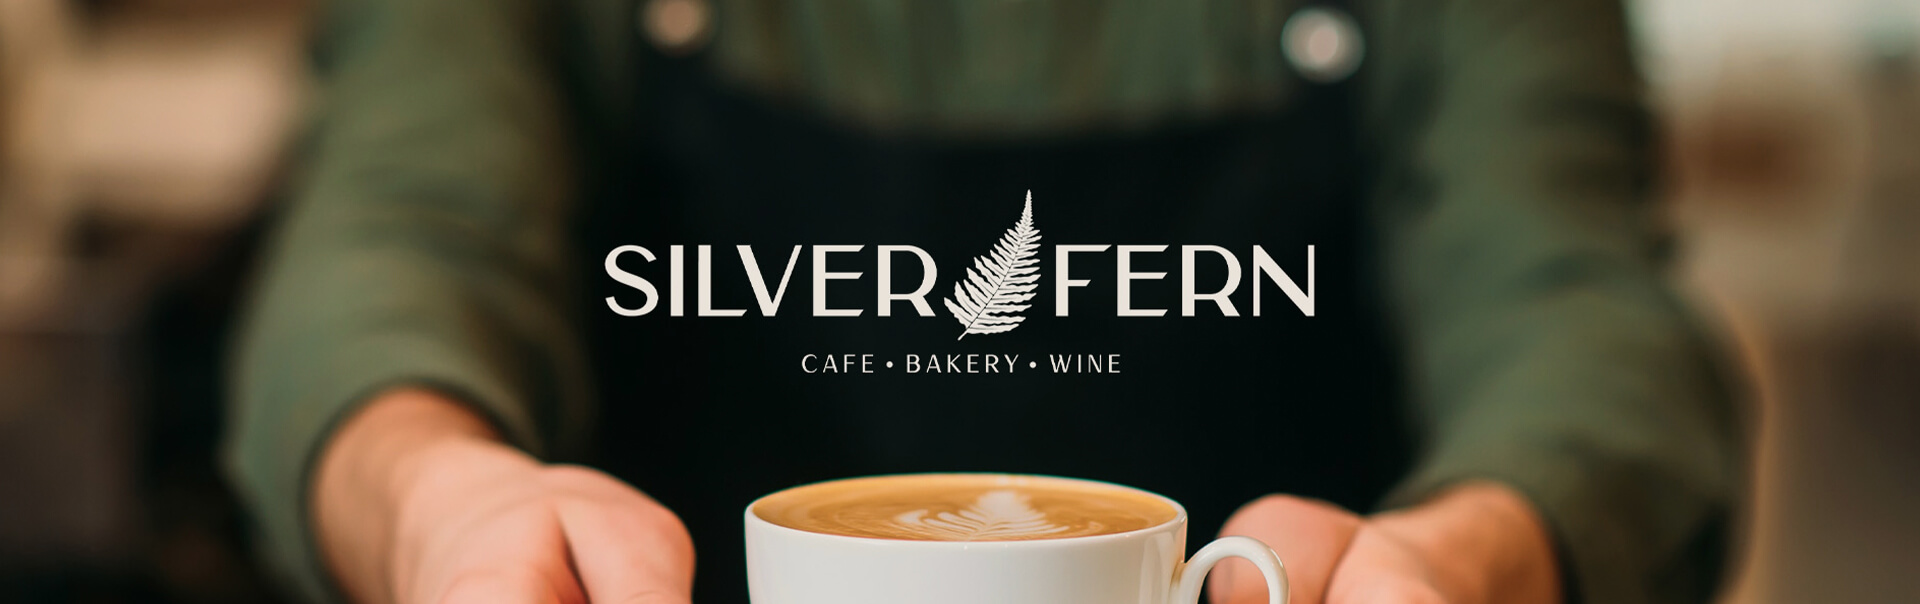 Silver Fern Cafe and Wine Bar